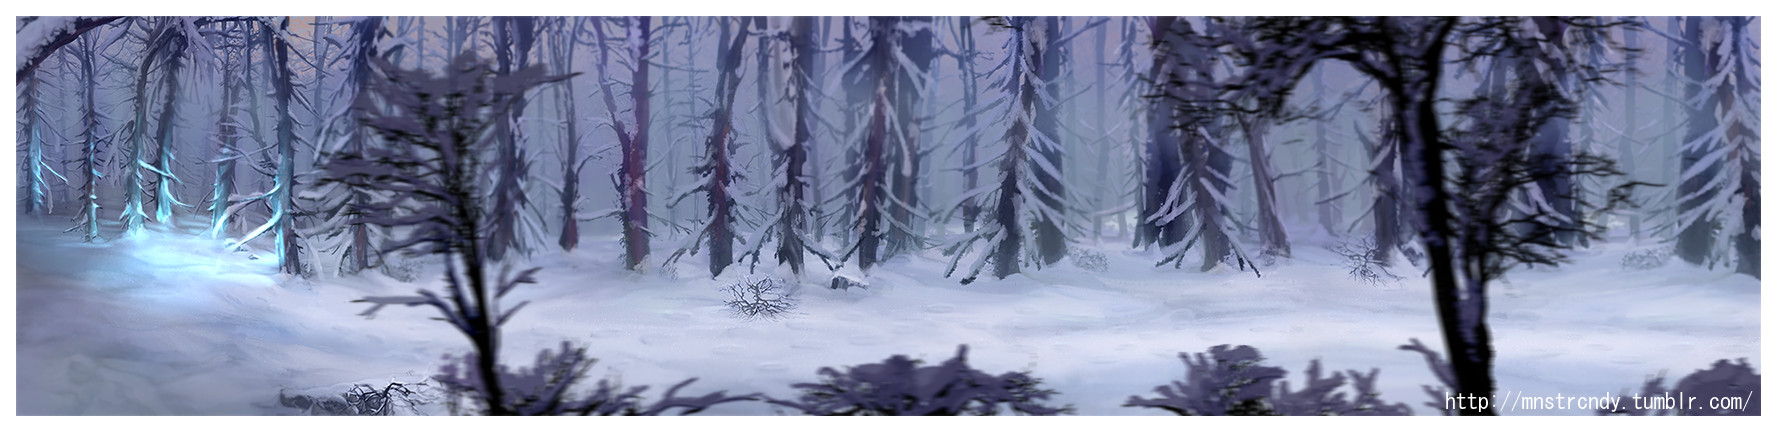 Backgrounds for Undertale RE:Incarnation - Animation.